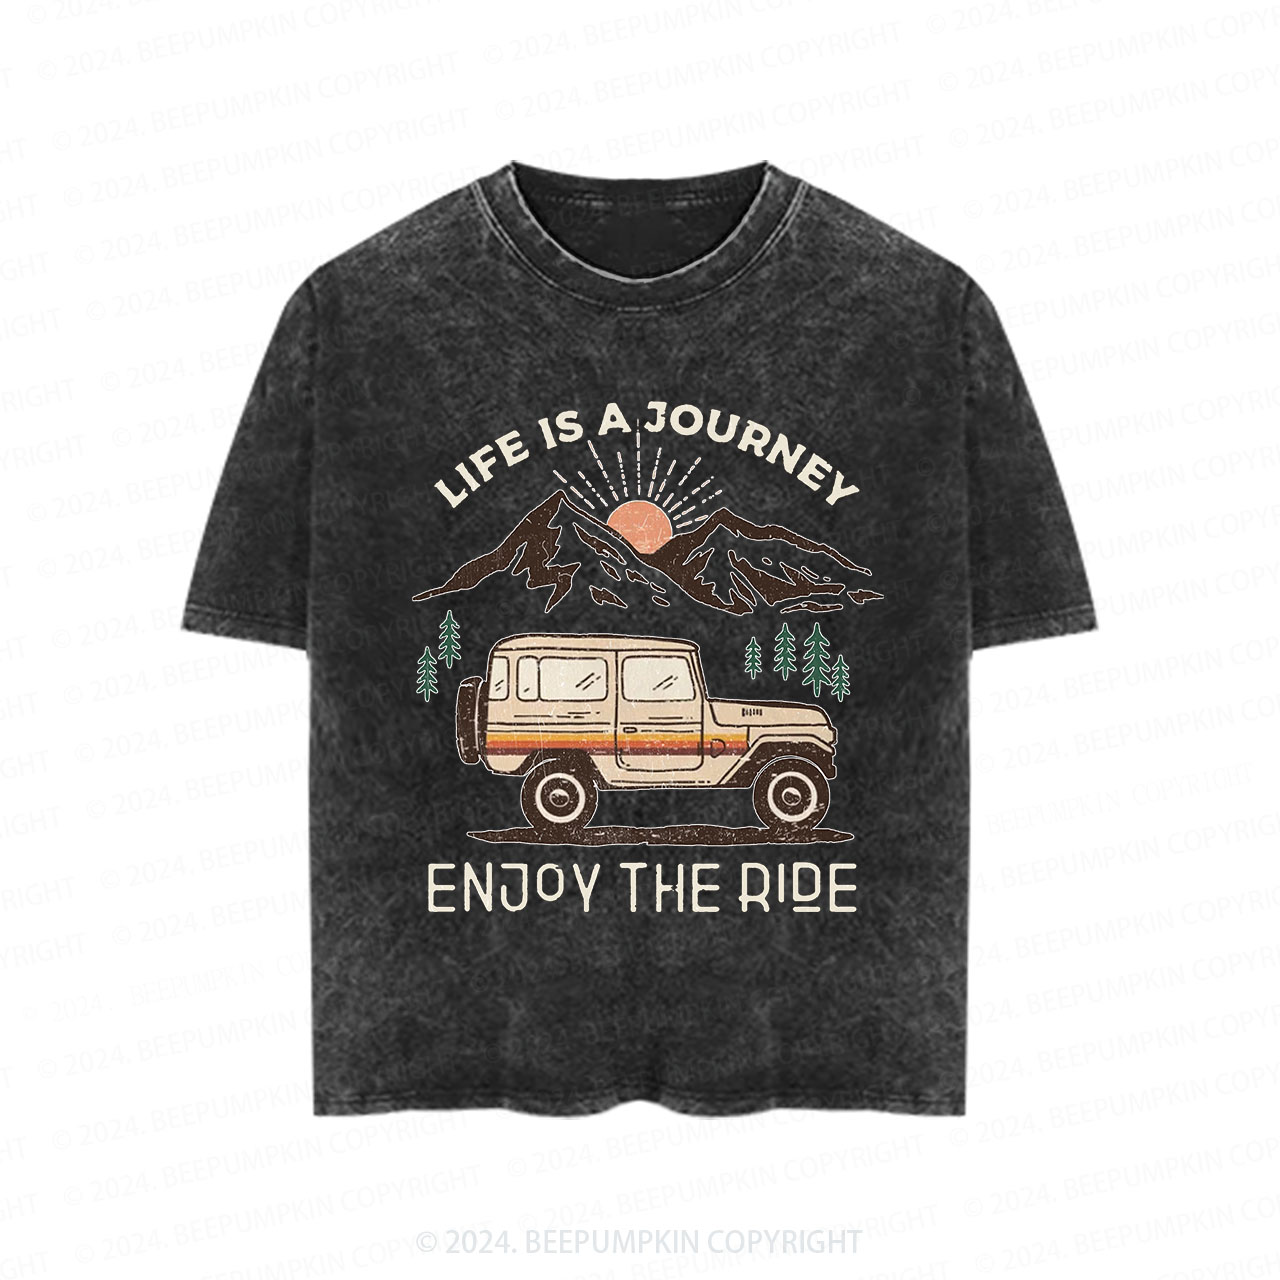  Life Is A Journey Enjoy The Ride Toddler&Kids Washed Tees         